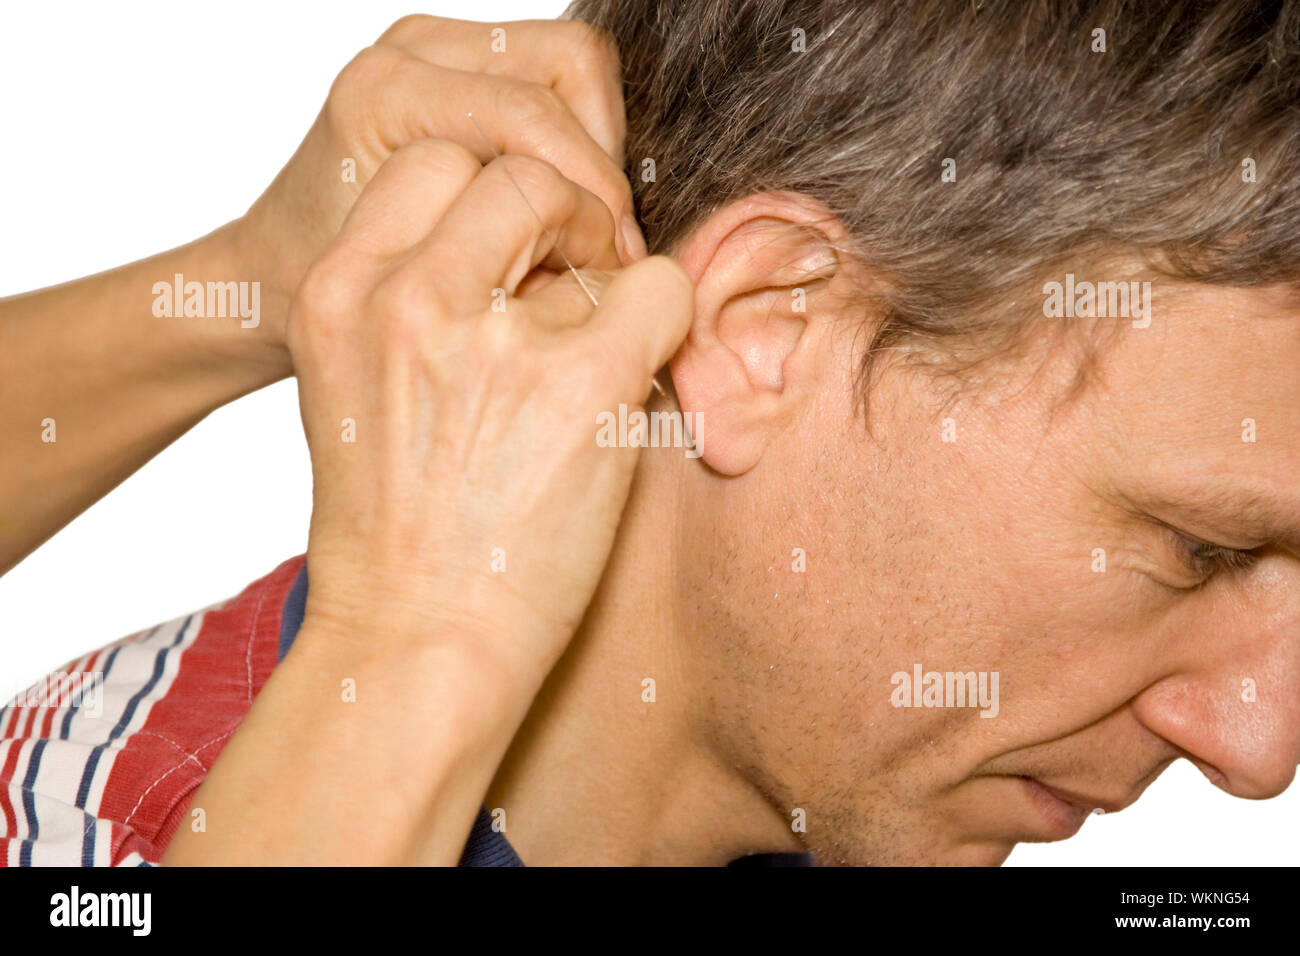 Cropped Image Of Hand Applying Acupuncture Needle On Man Neck Stock Photo